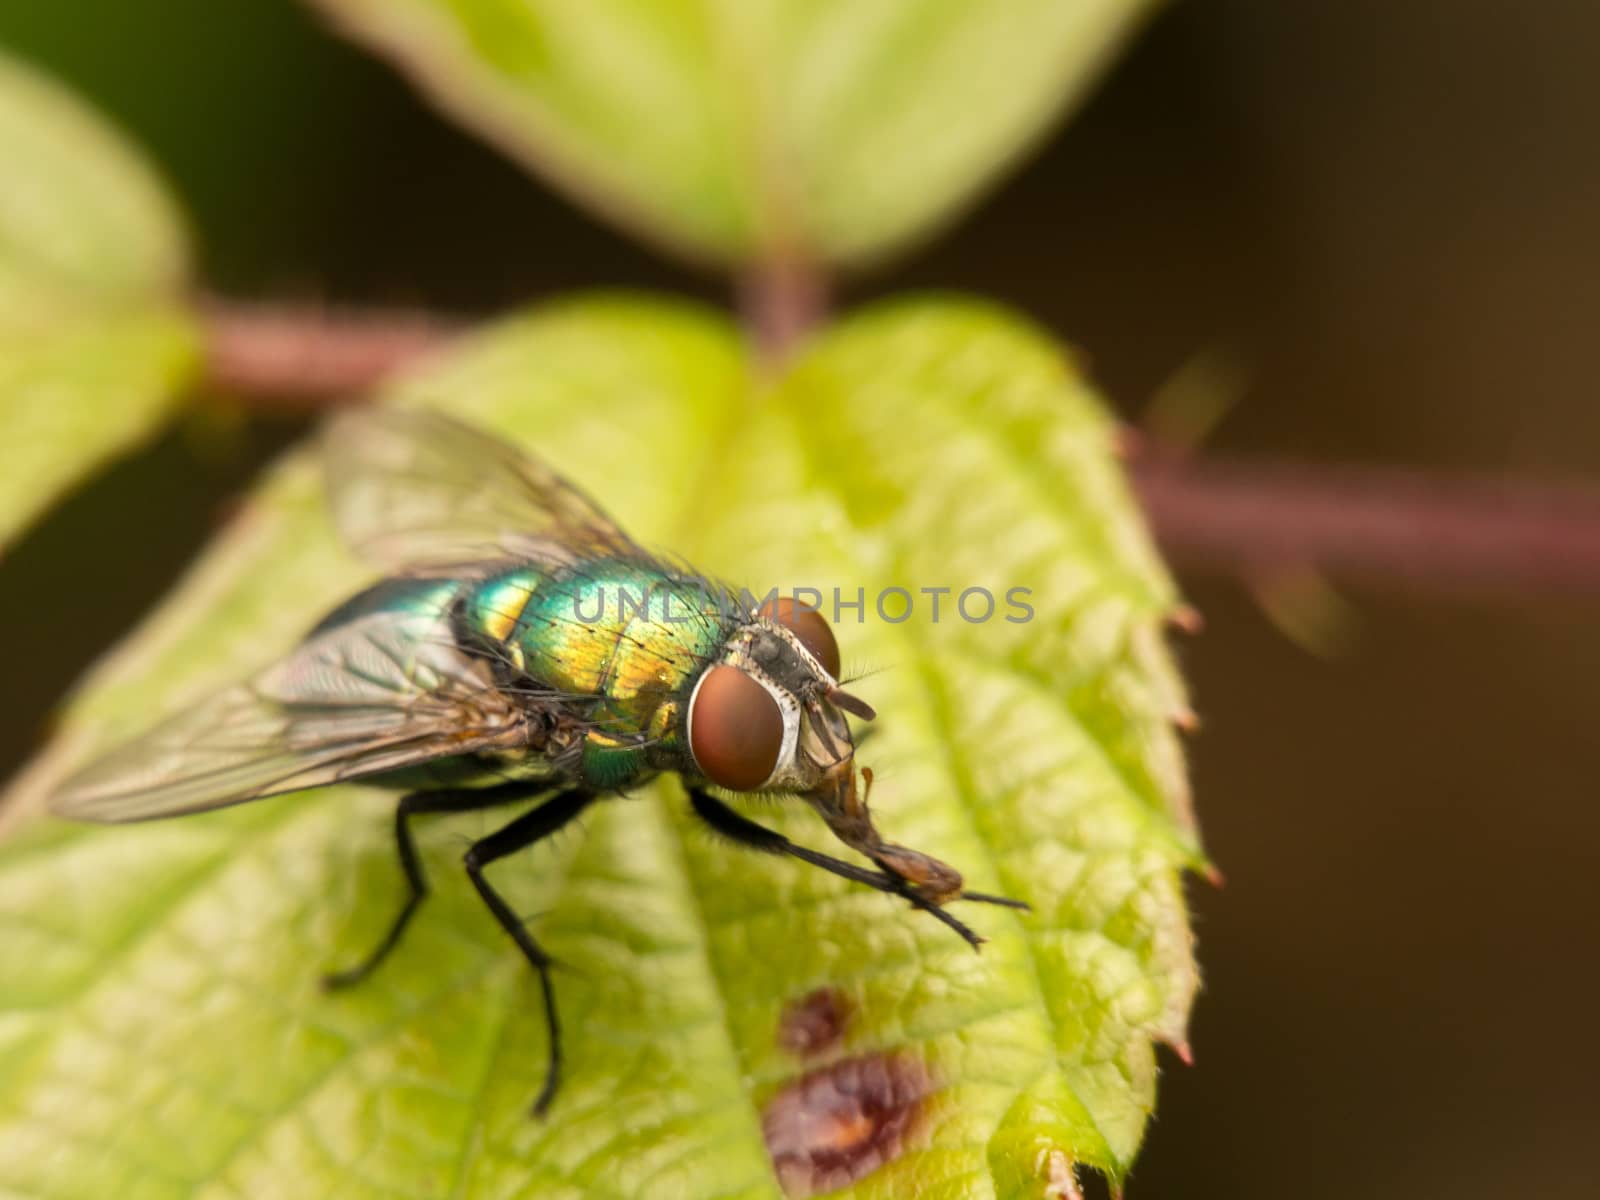 Solitary fly shot close up sitting on green leaf